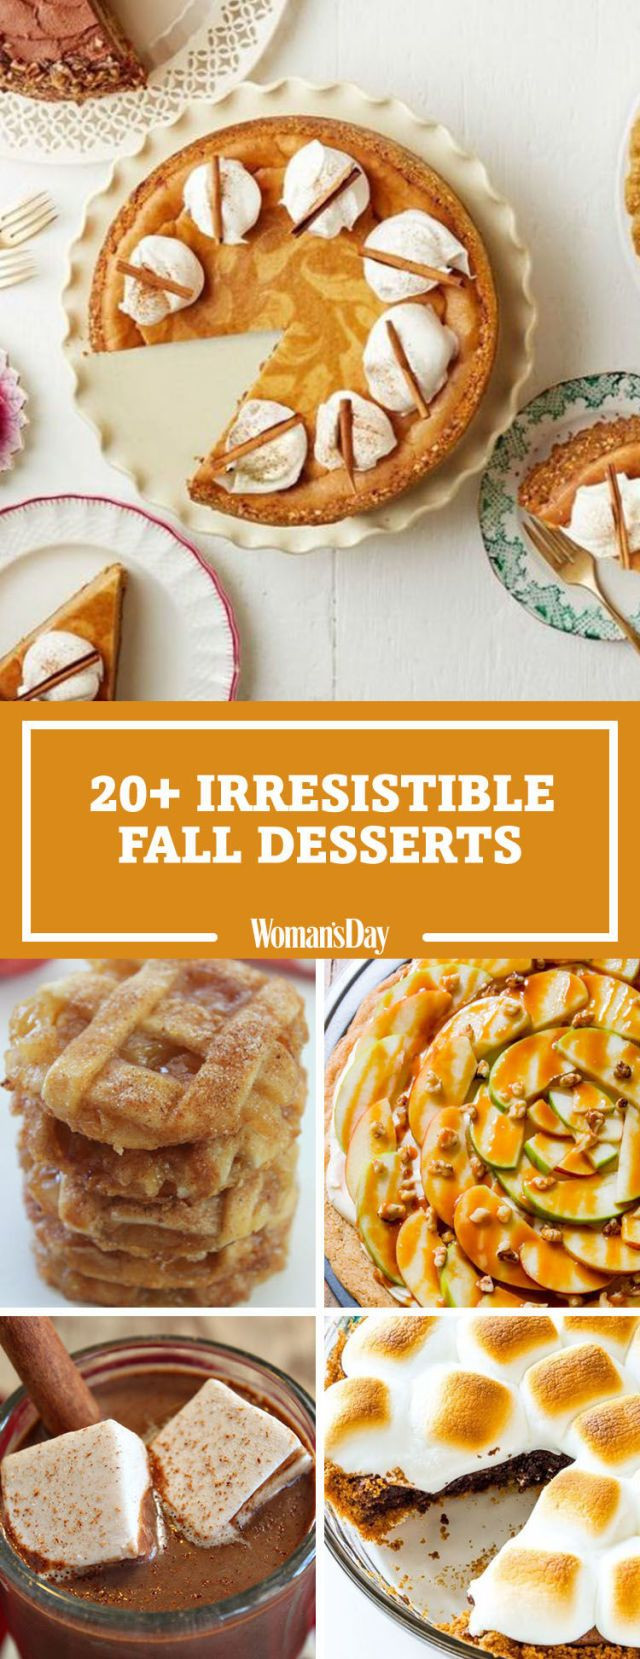 Recipes For Fall Desserts
 31 Easy Fall Desserts Best Recipes for Autumn Desserts